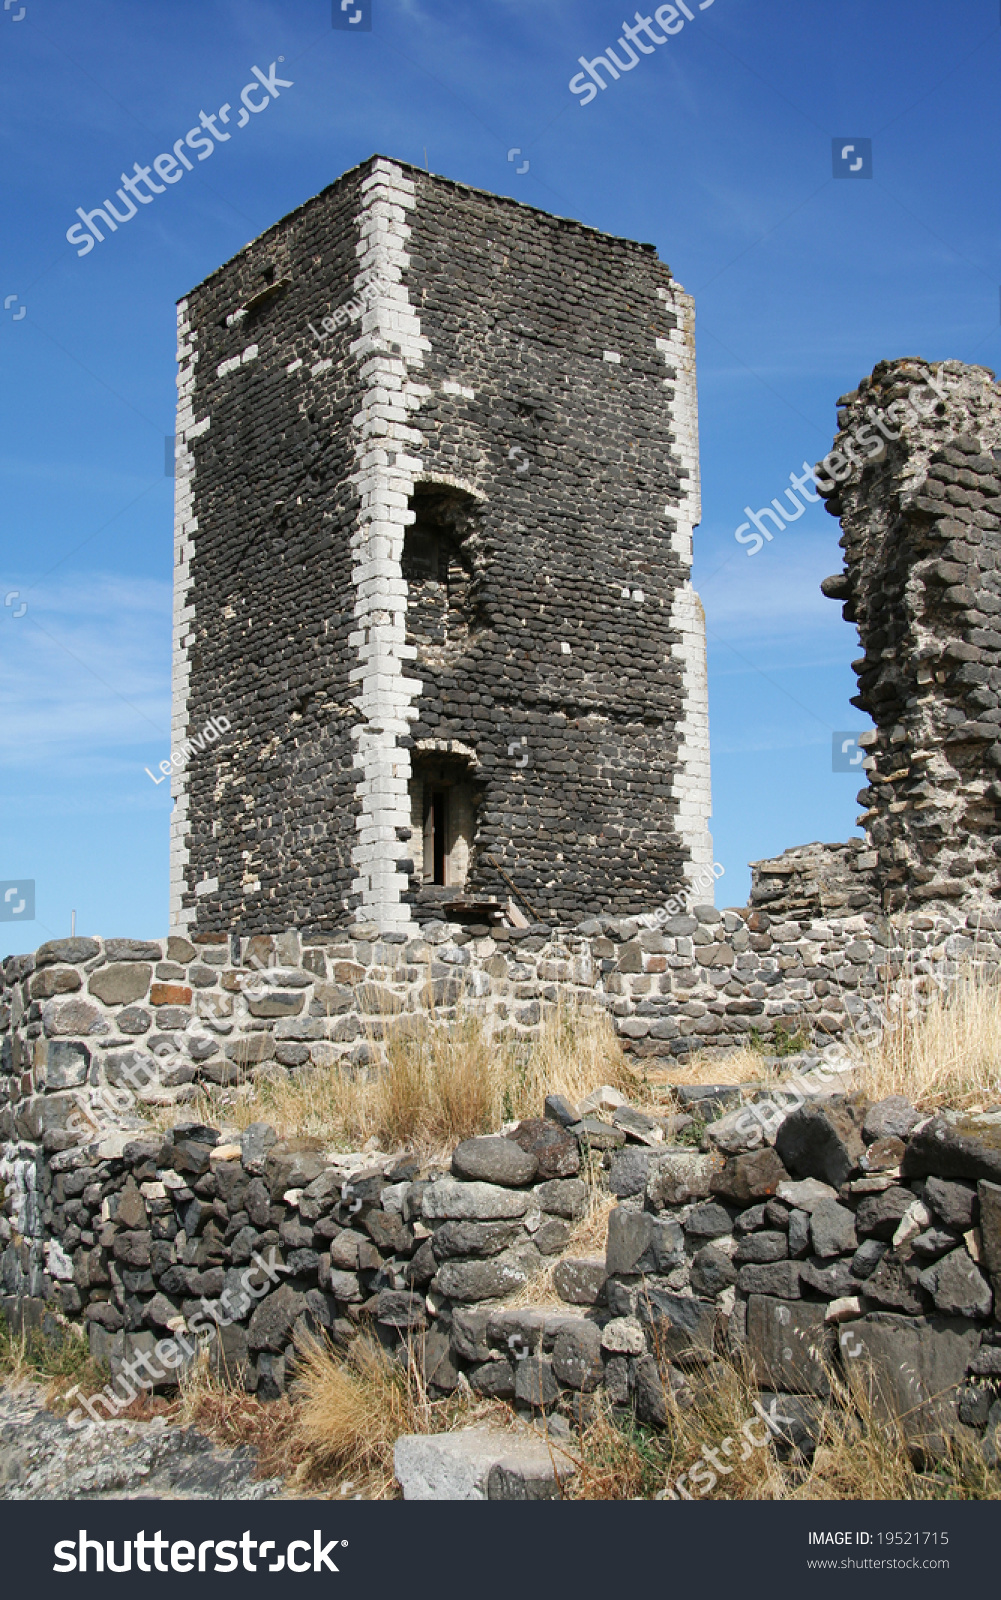 Basalt Tower Of Castle Ruin In Mirabel, Ardeche Mountains, France ...